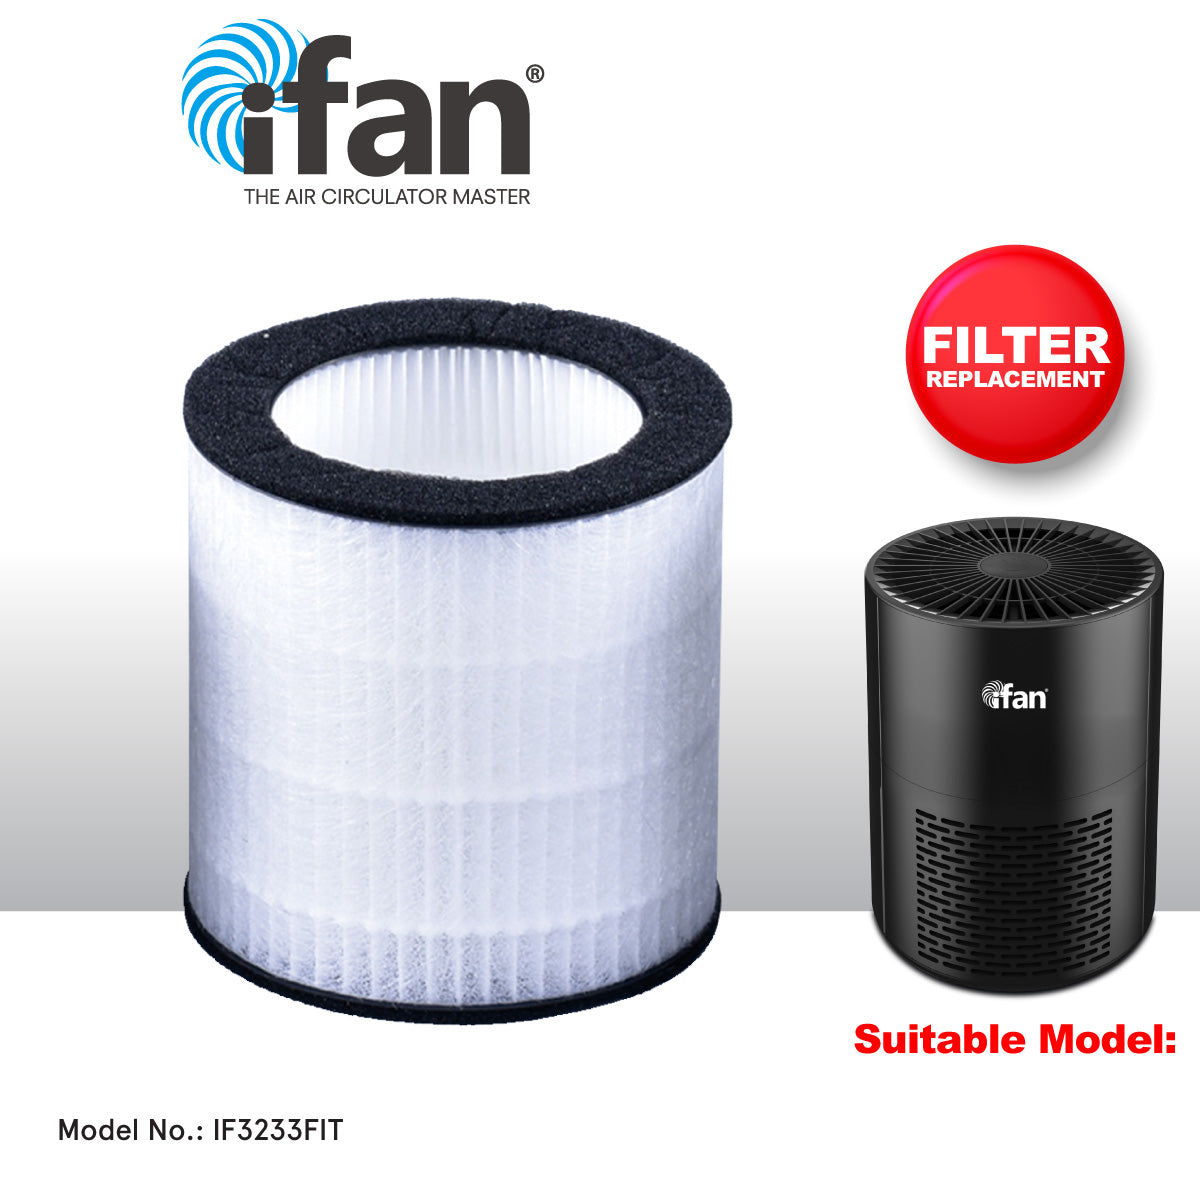 Air Purifier Replacement Filter ( IF3233FIT)